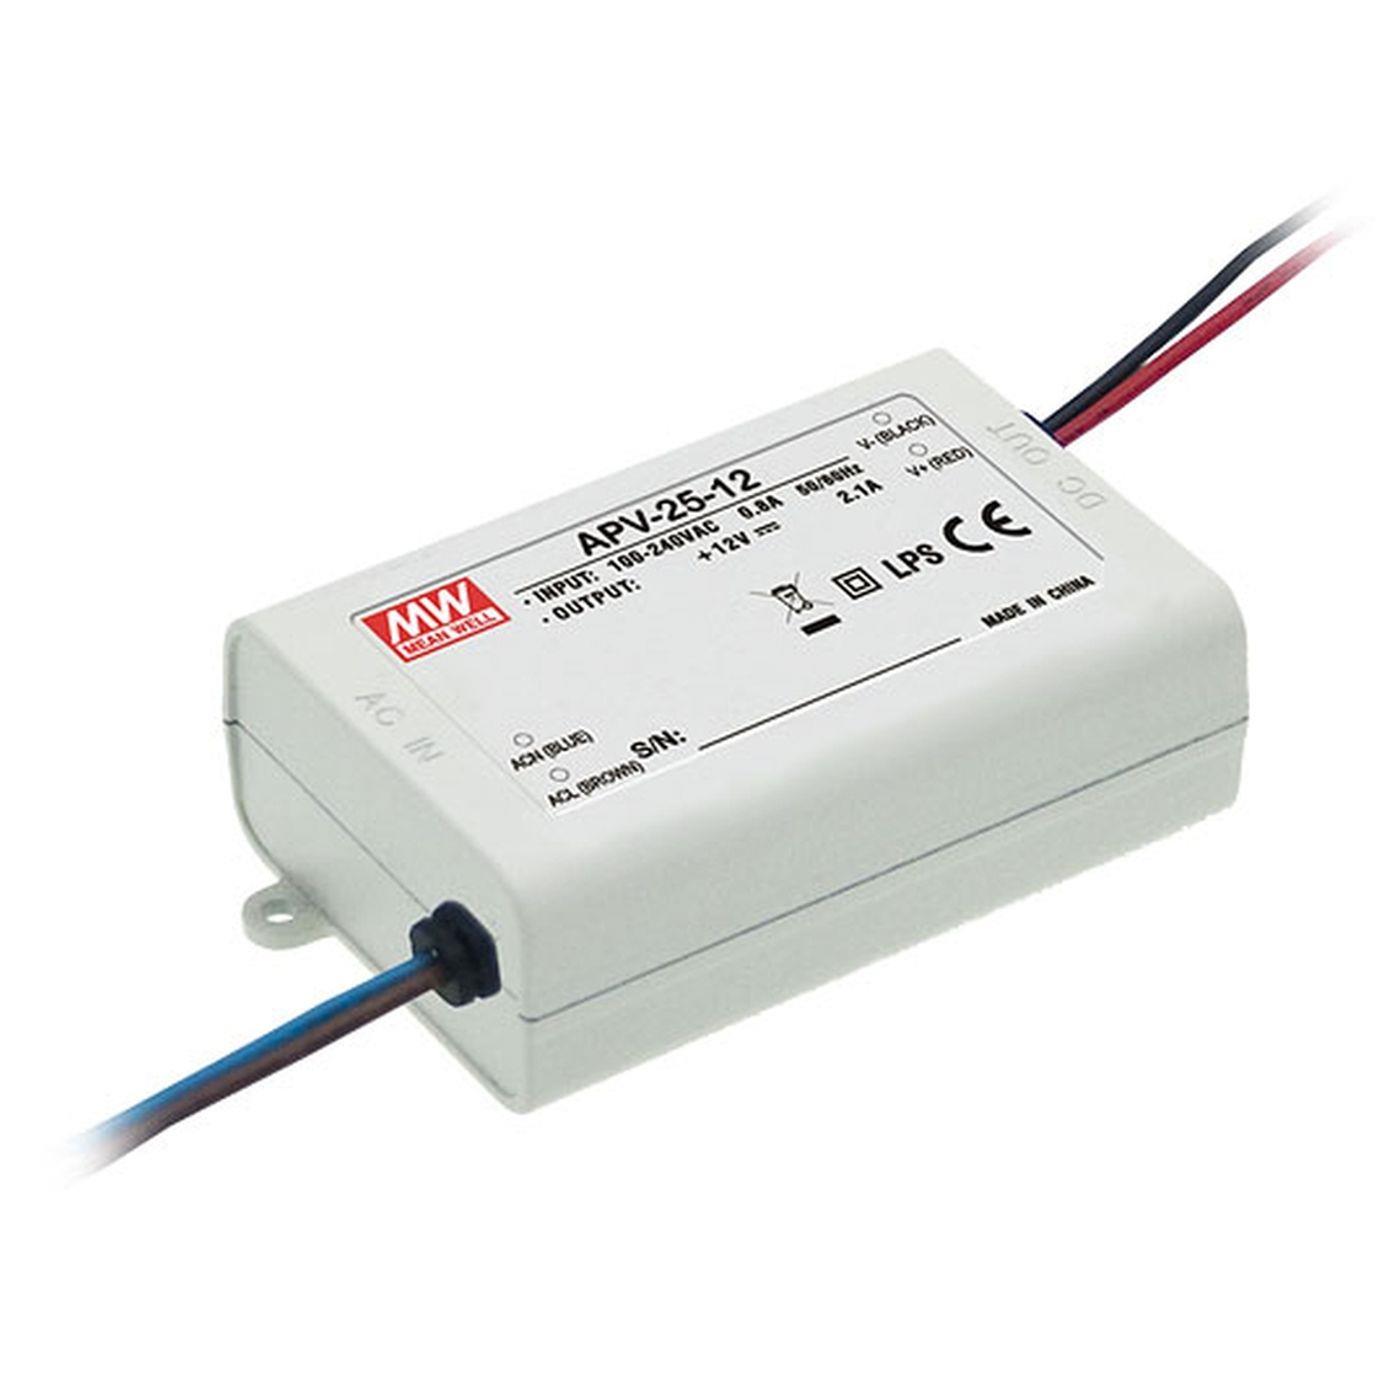 APC-25-700 25W 700mA 11...36VDC Constant current LED power supply Driver Transformer